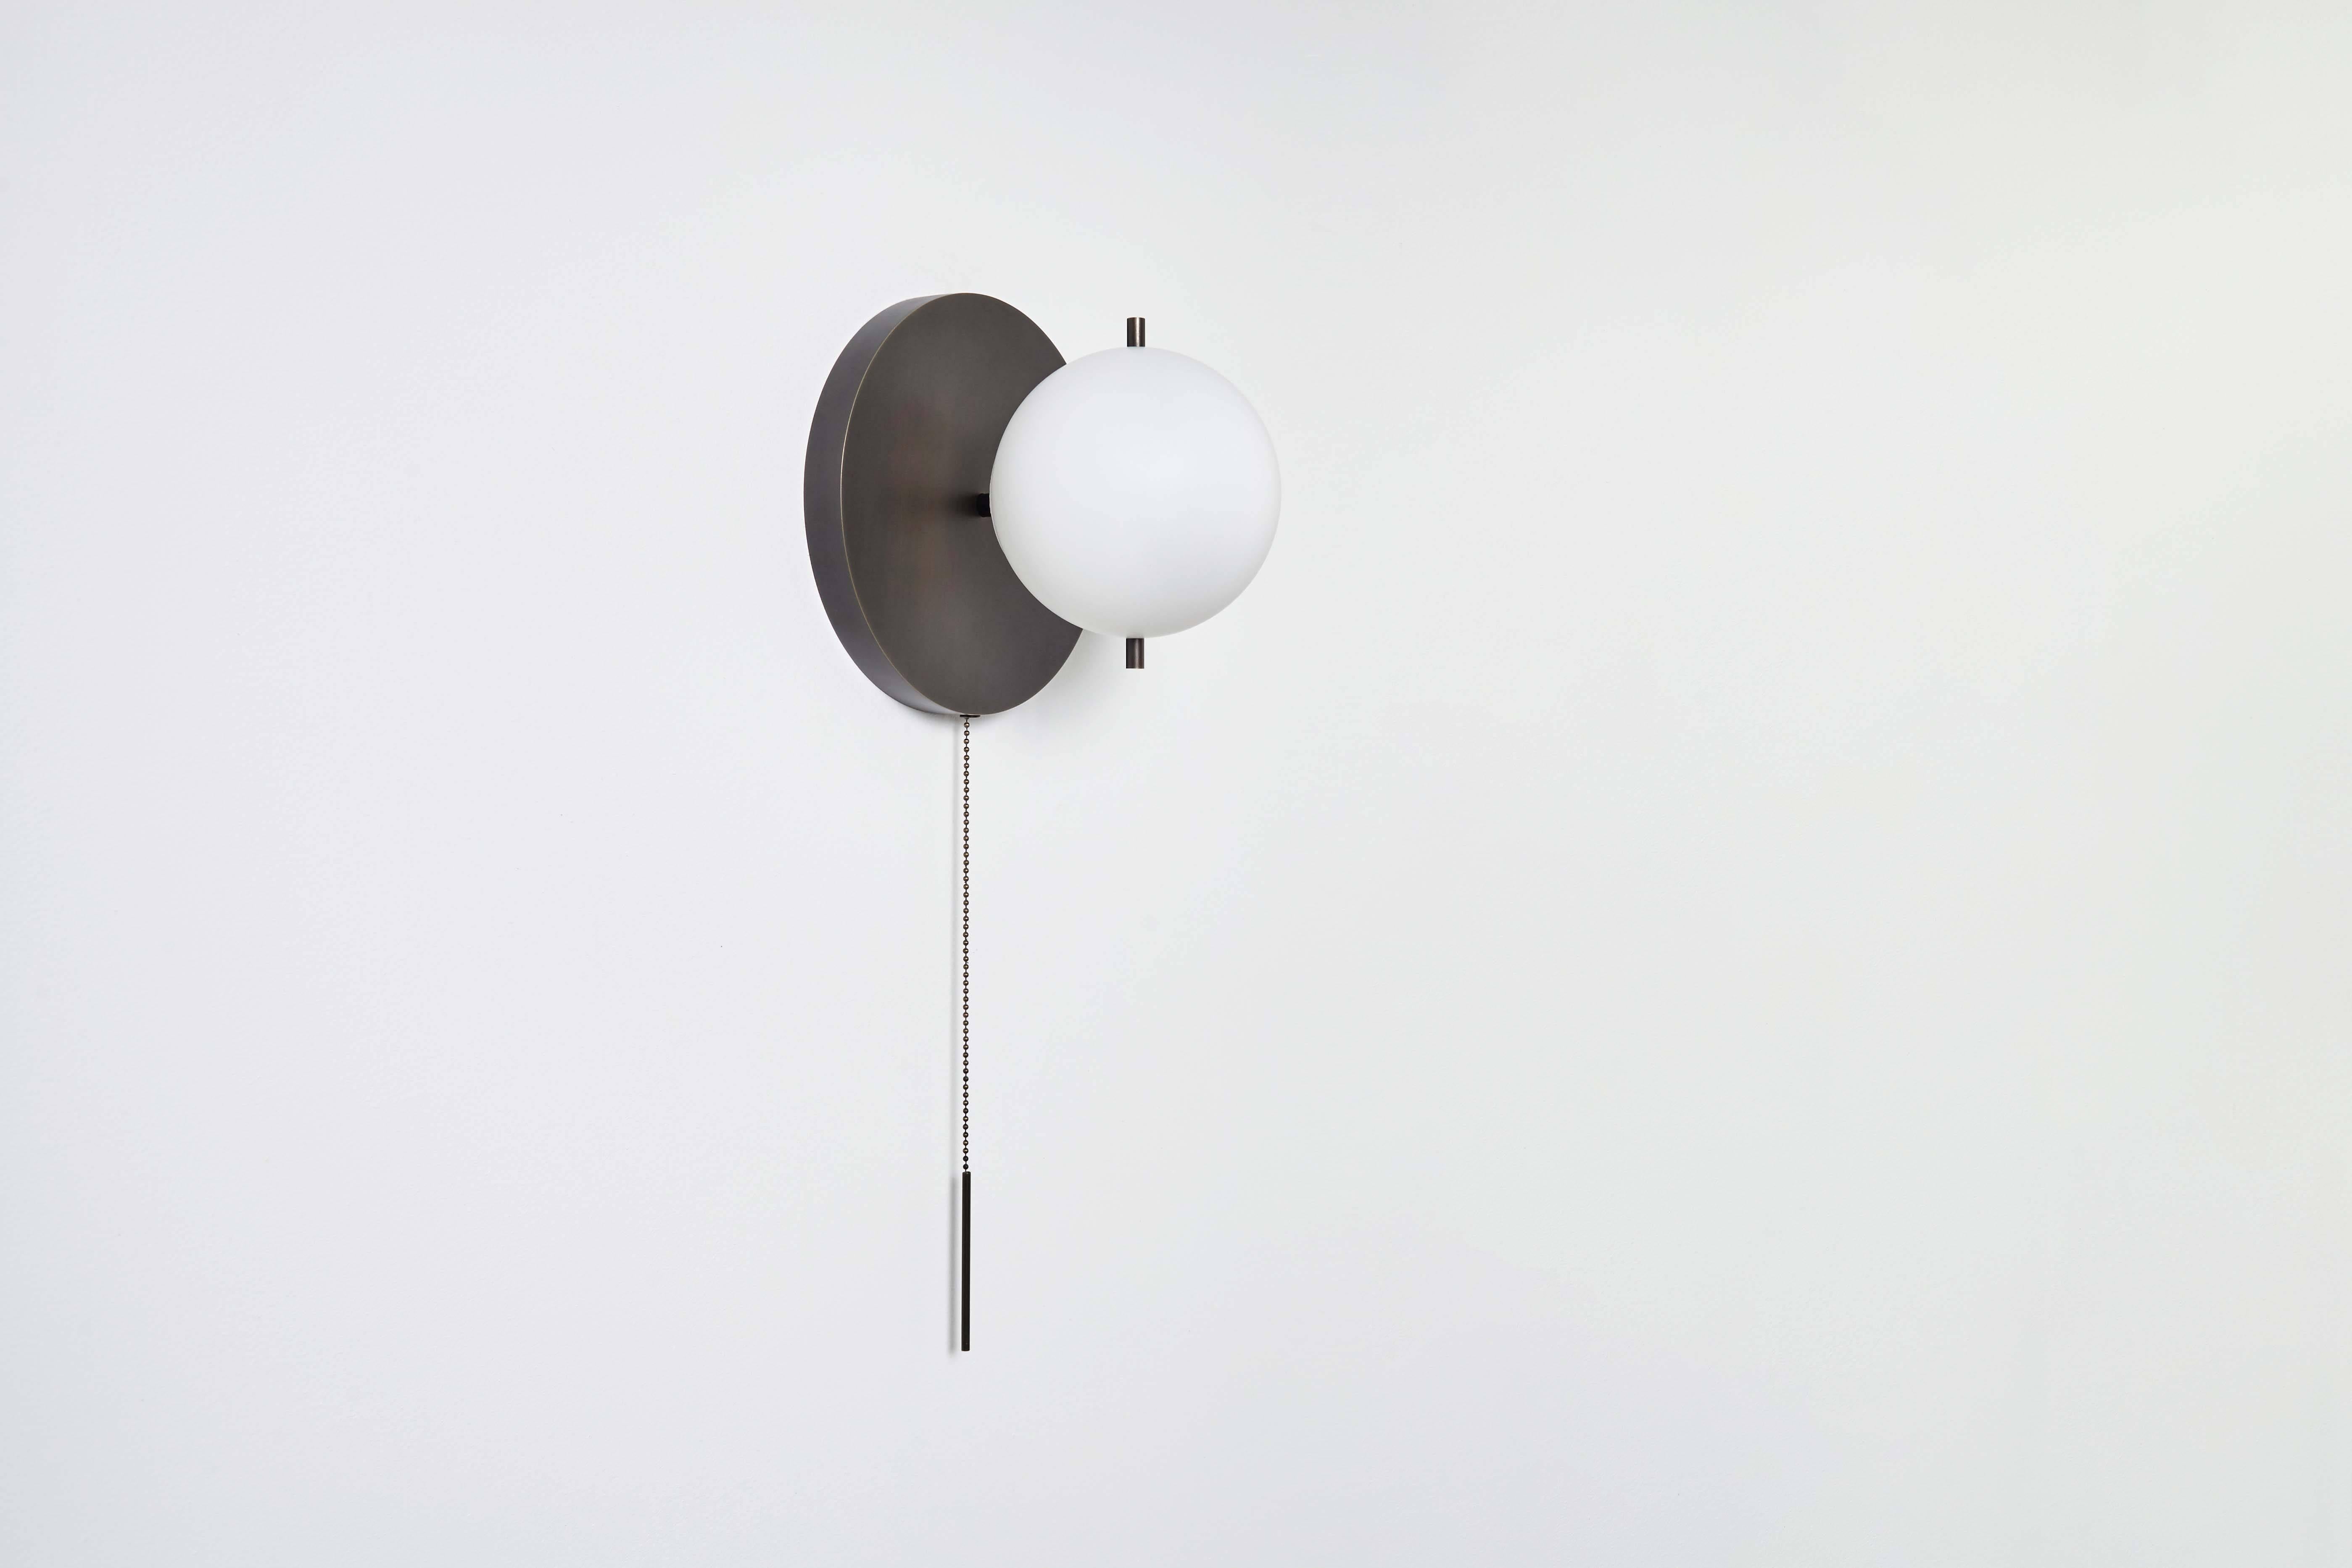 The signal sconce features a hand sanded globe. The fixture is delicately mounted between two metal pins above a luminous canopy, creating a hieroglyphic composition. A pull chain holds a slender rod, giving the piece a jewel-like presence.